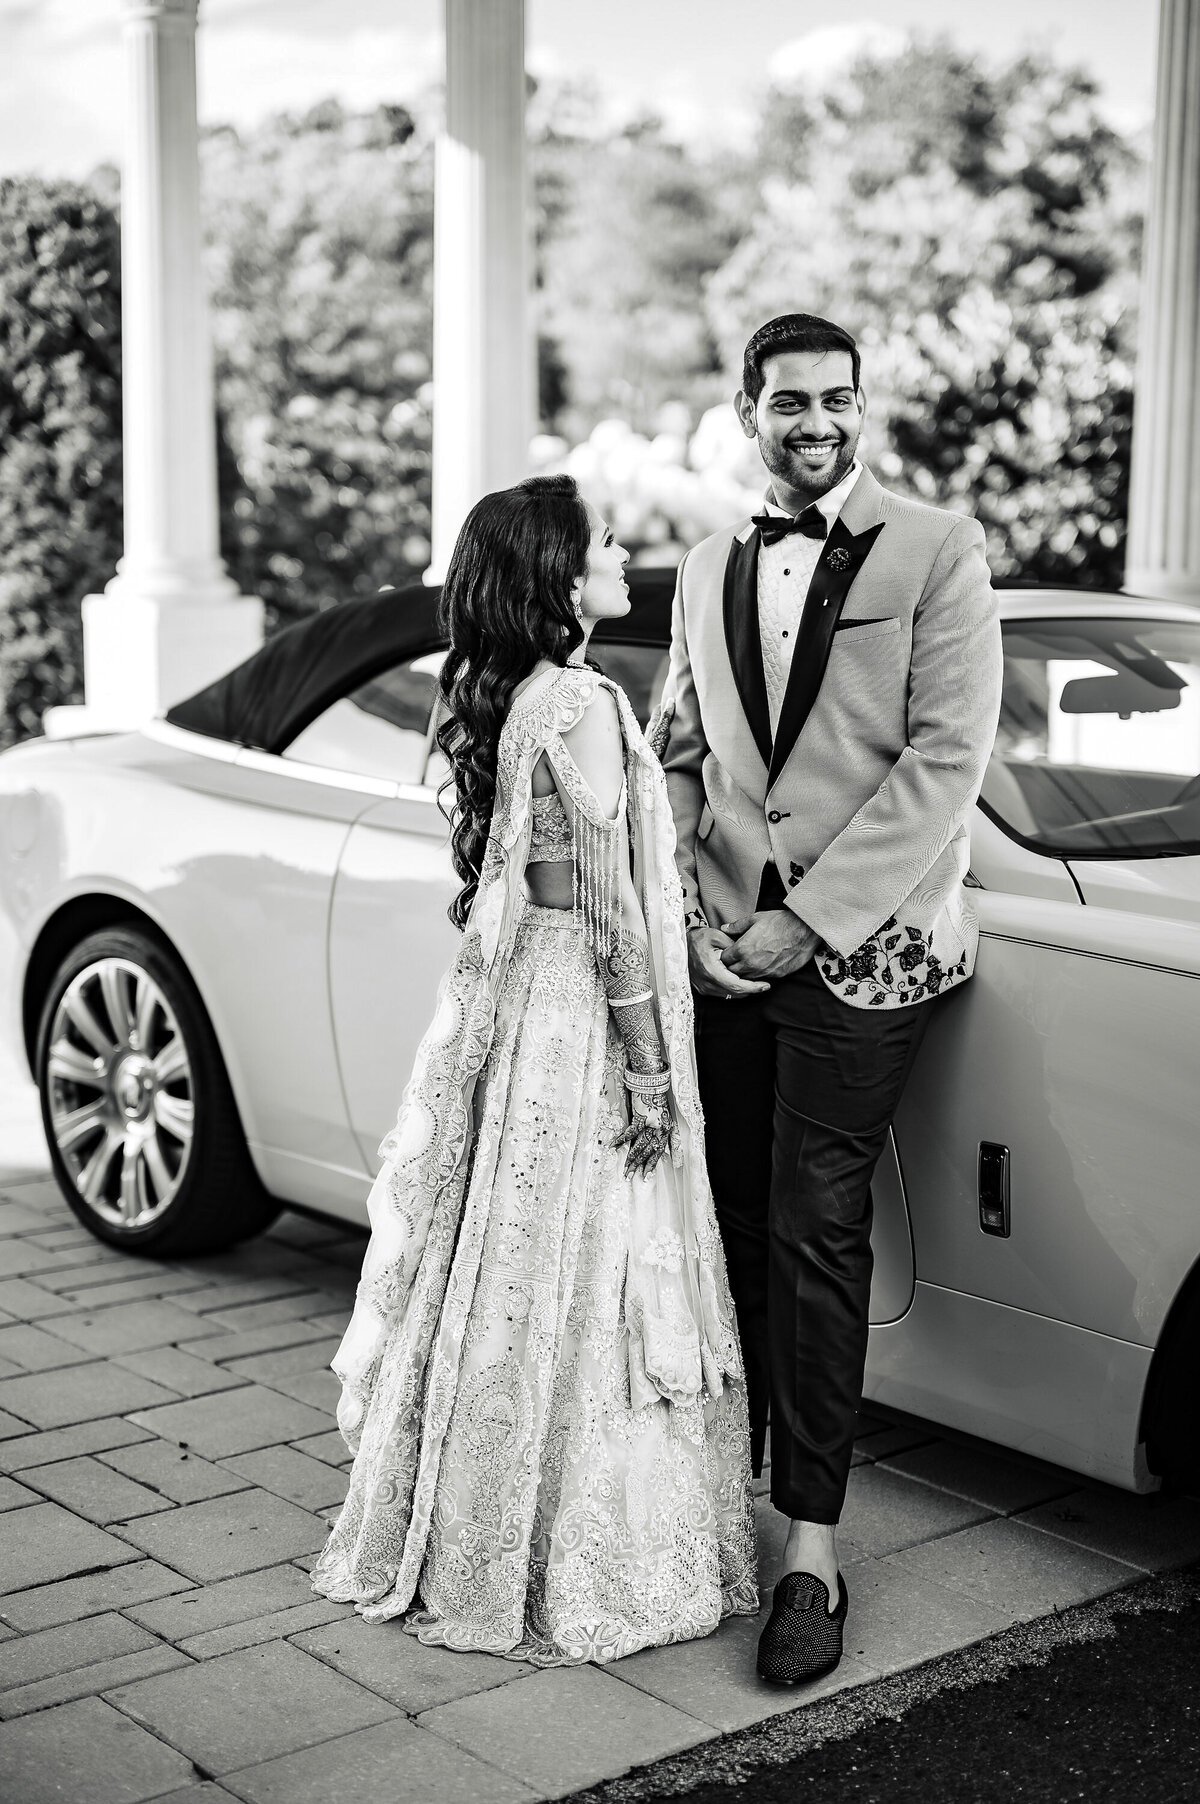 Ishan Fotografi is an experienced South Asian Wedding photographer based out of Hamburg, NJ.